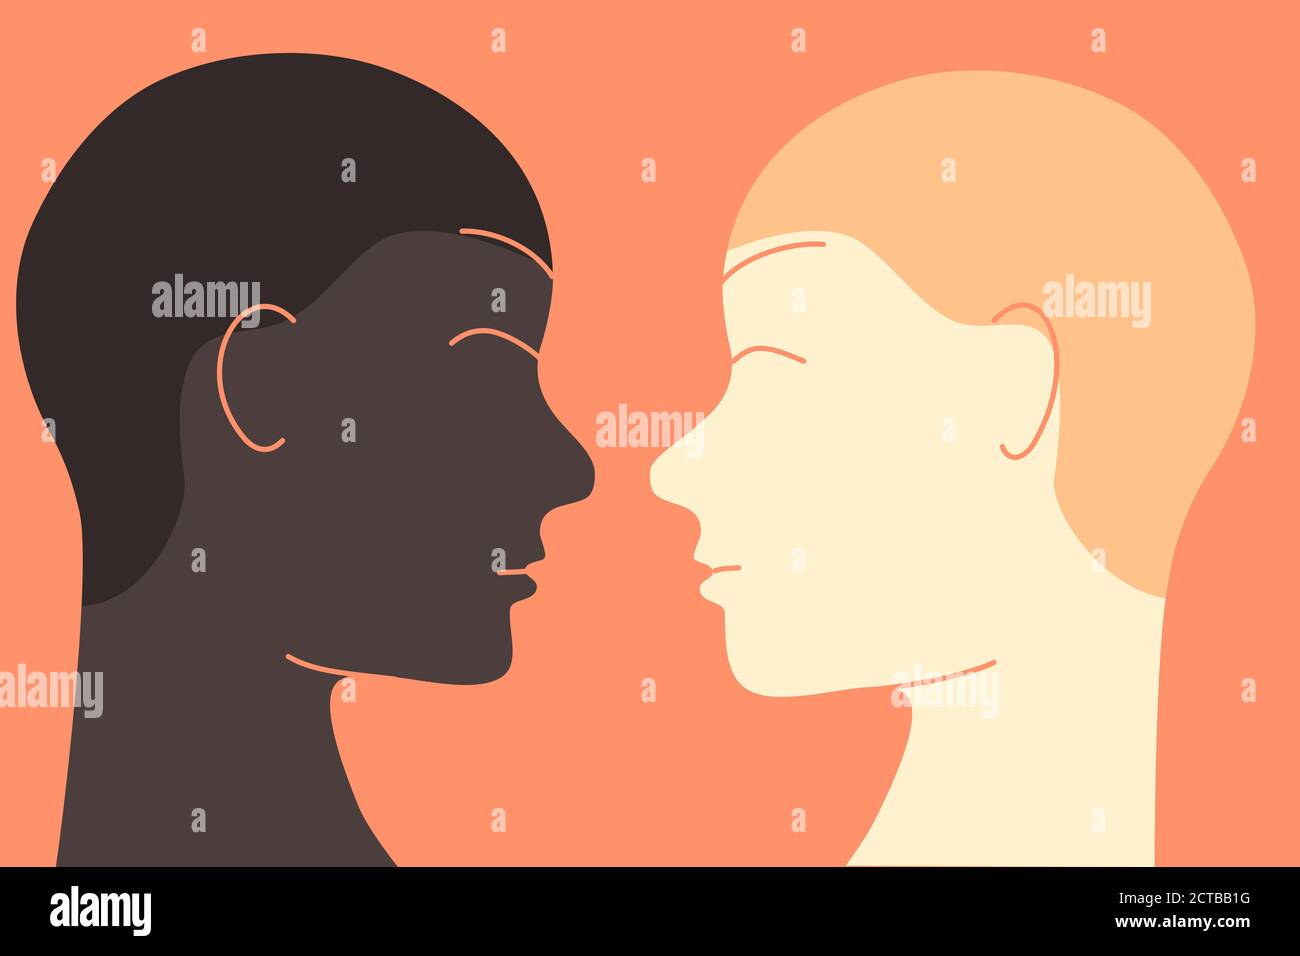 Racial equality concept illustration. One African American ethnicity person looking and smiling to a White Caucasian ethnicity person. Flat design. Stock Photo